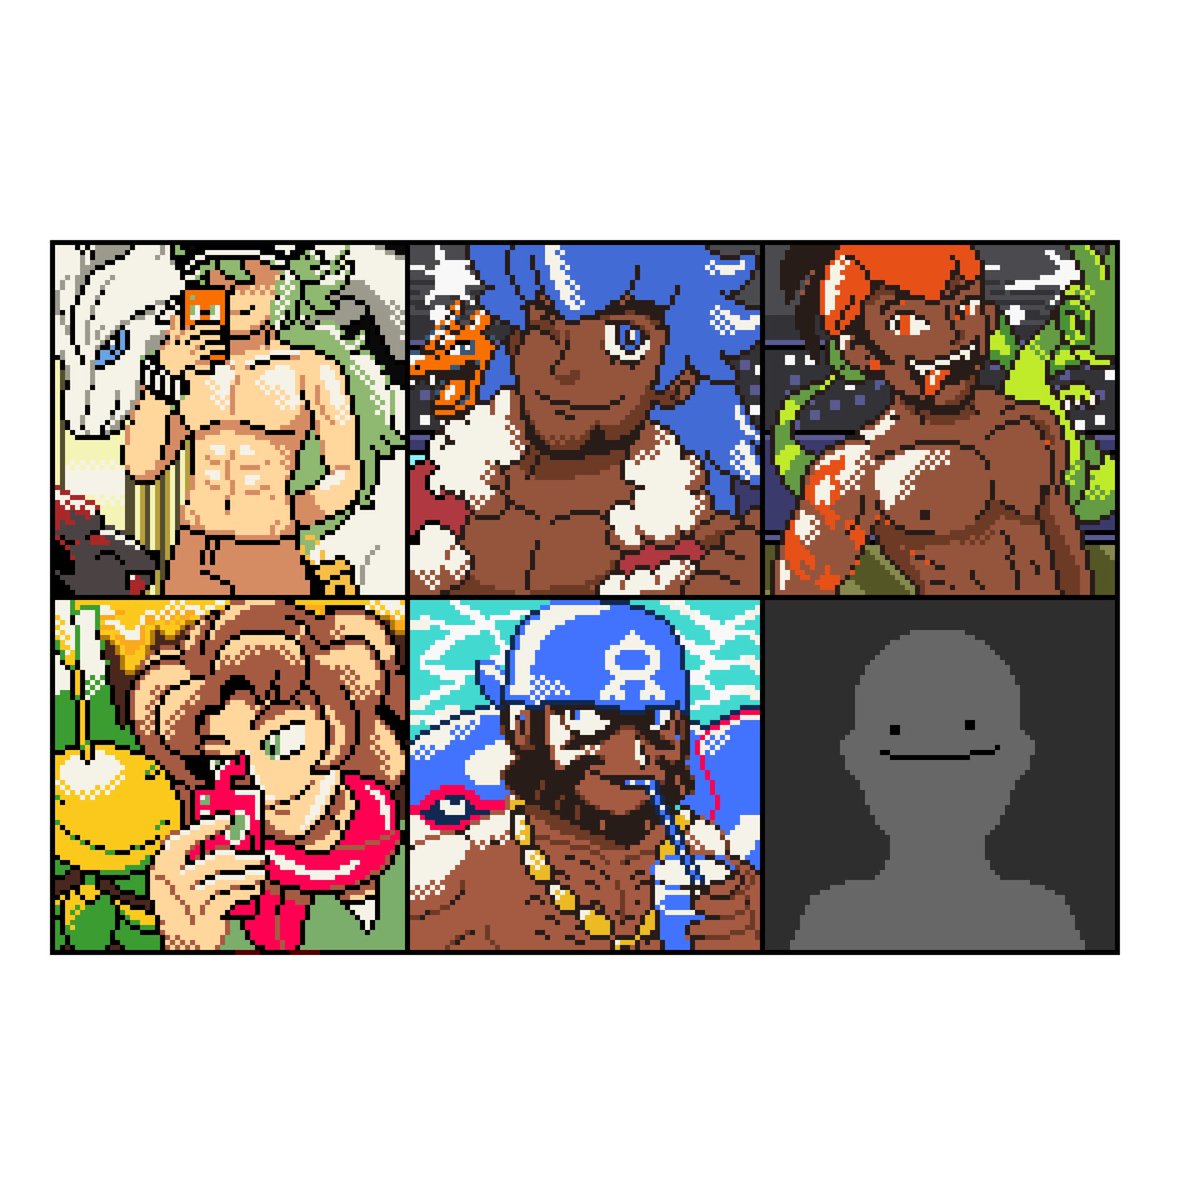 All the poké-hunks you could want https://t.co/oOYKgFAfeD 